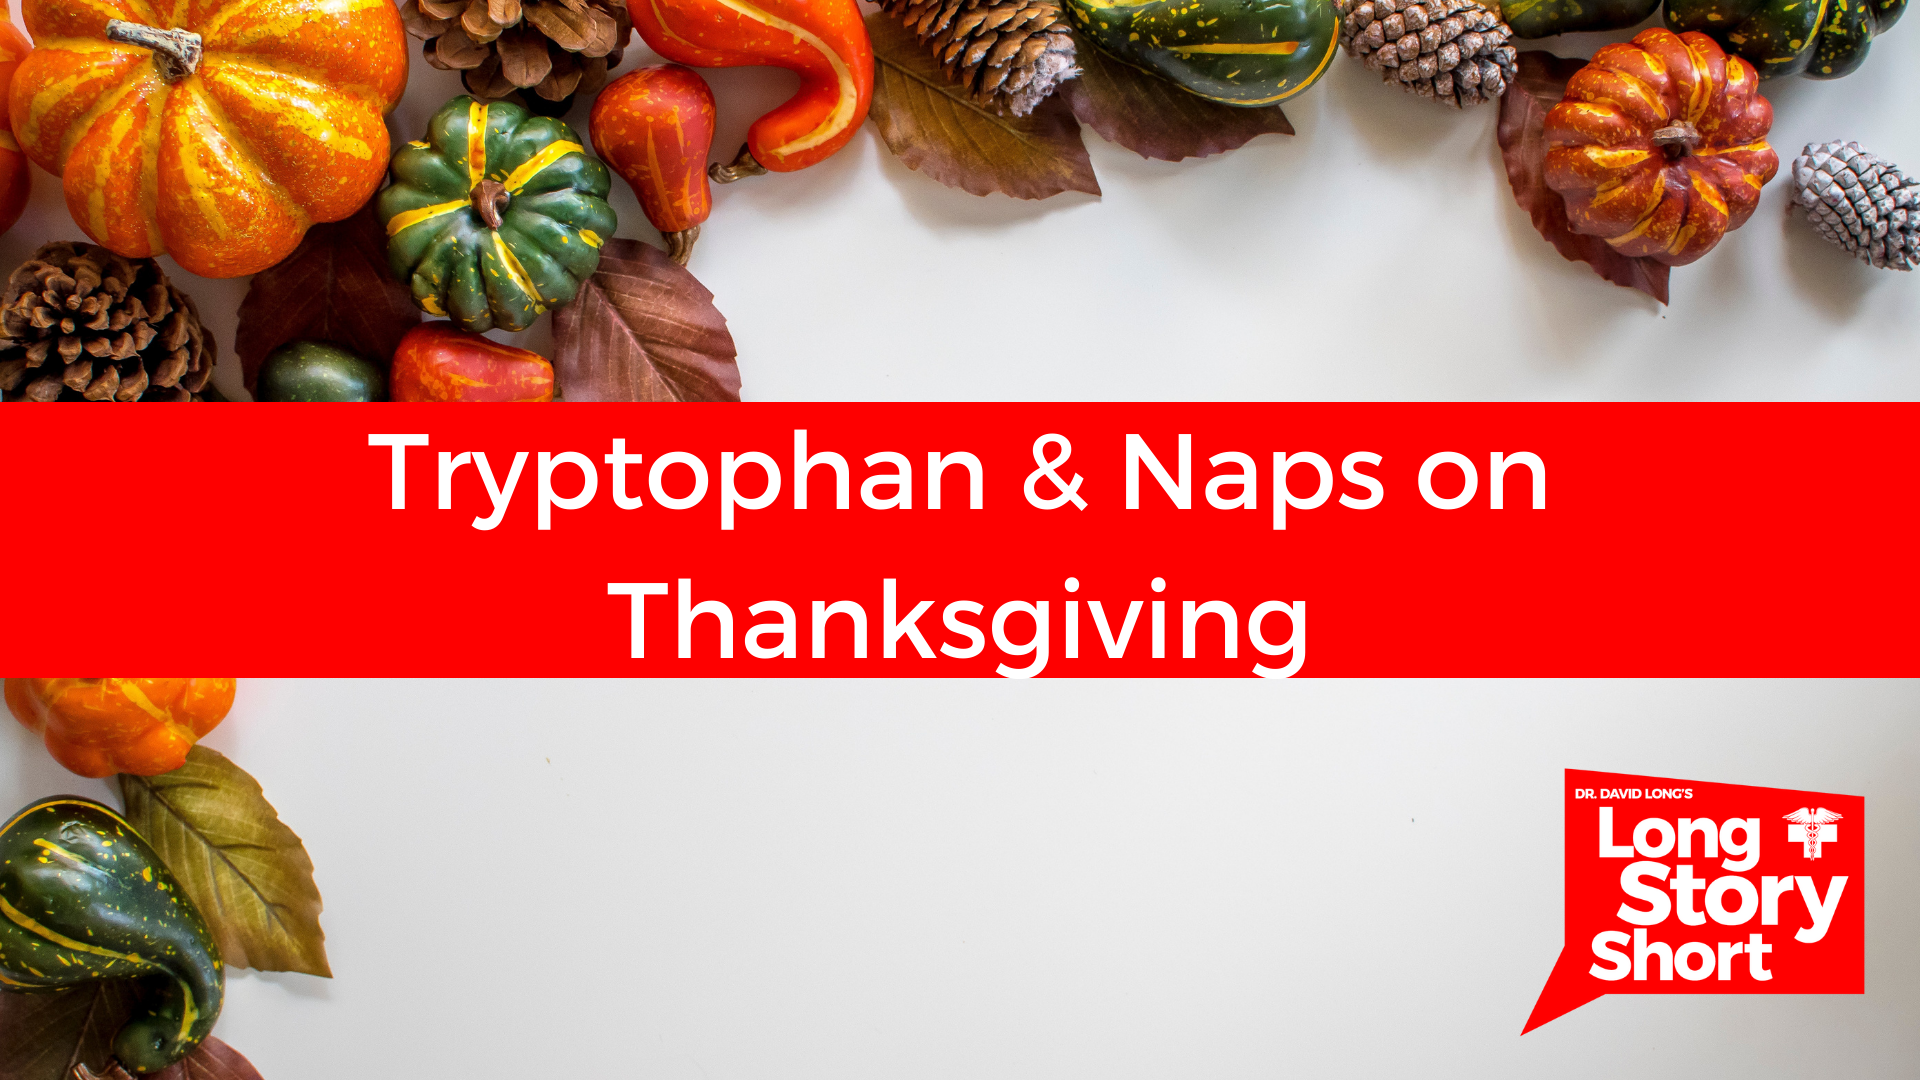 You are currently viewing Tryptophan and Naps on Thanksgiving – Dr. David Long